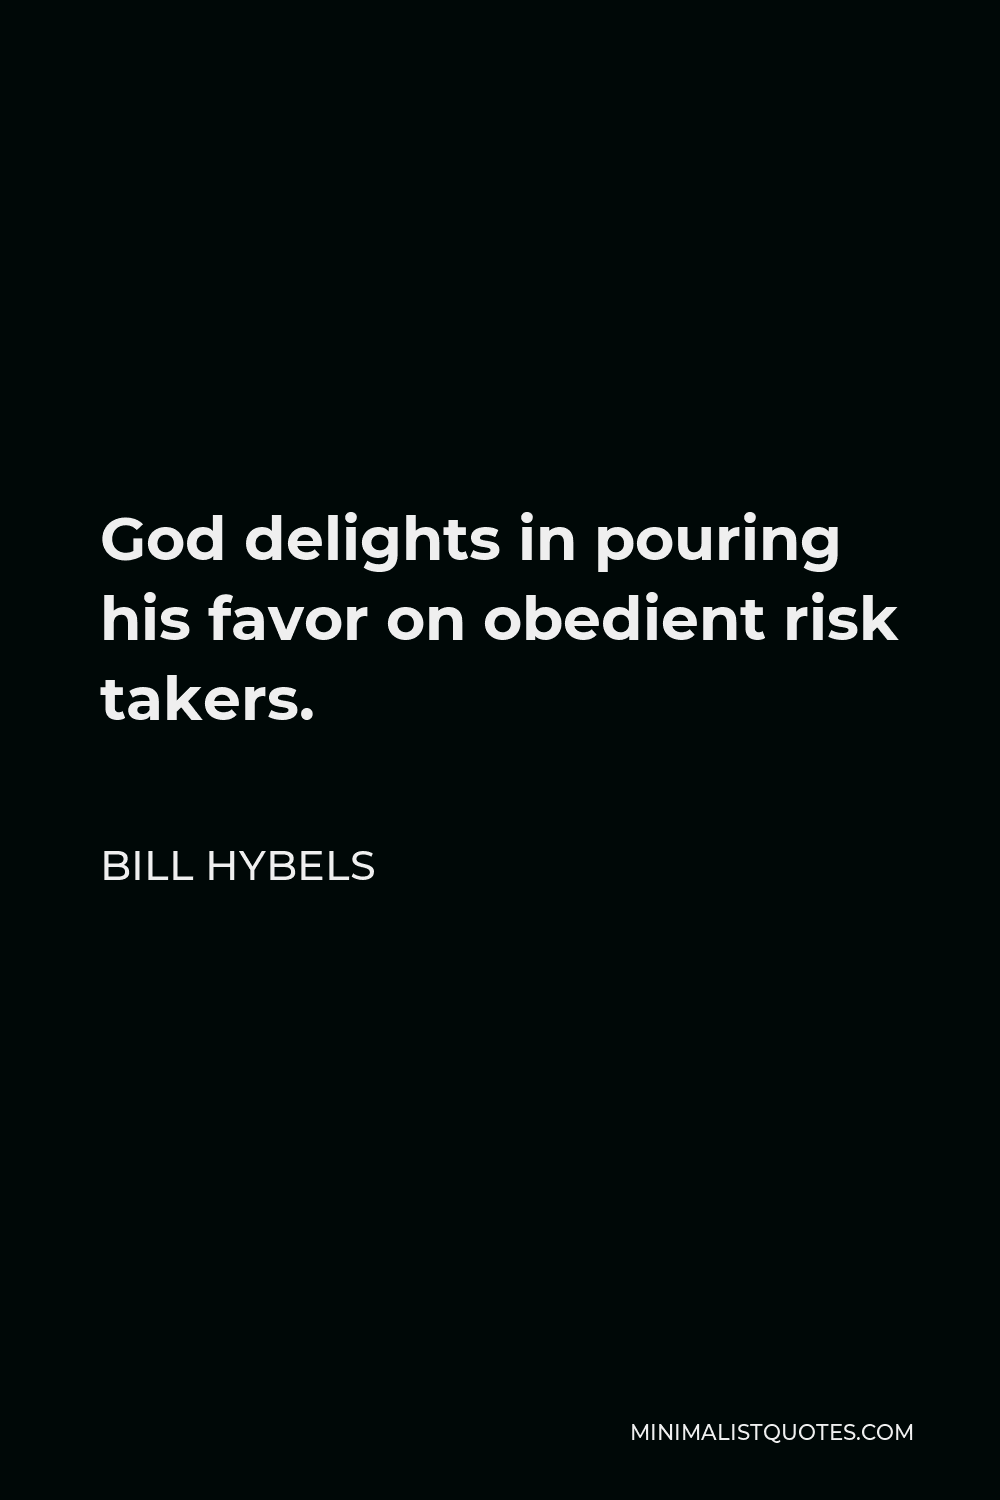 Bill Hybels Quote - God delights in pouring his favor on obedient risk takers.